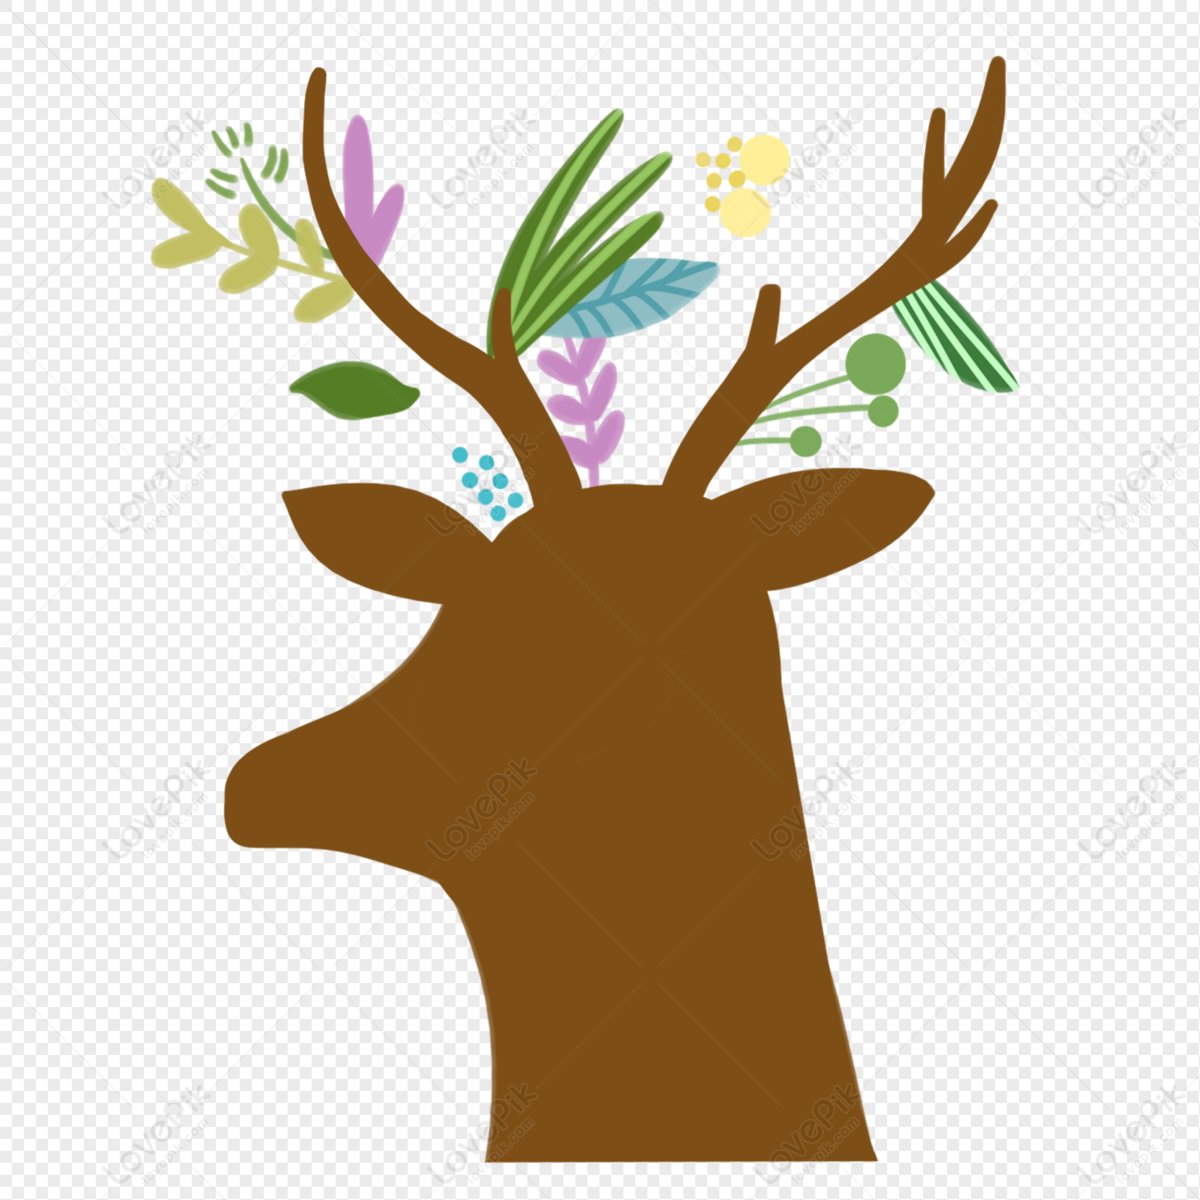 Deer Head PNG Free Download And Clipart Image For Free Download - Lovepik |  401531133